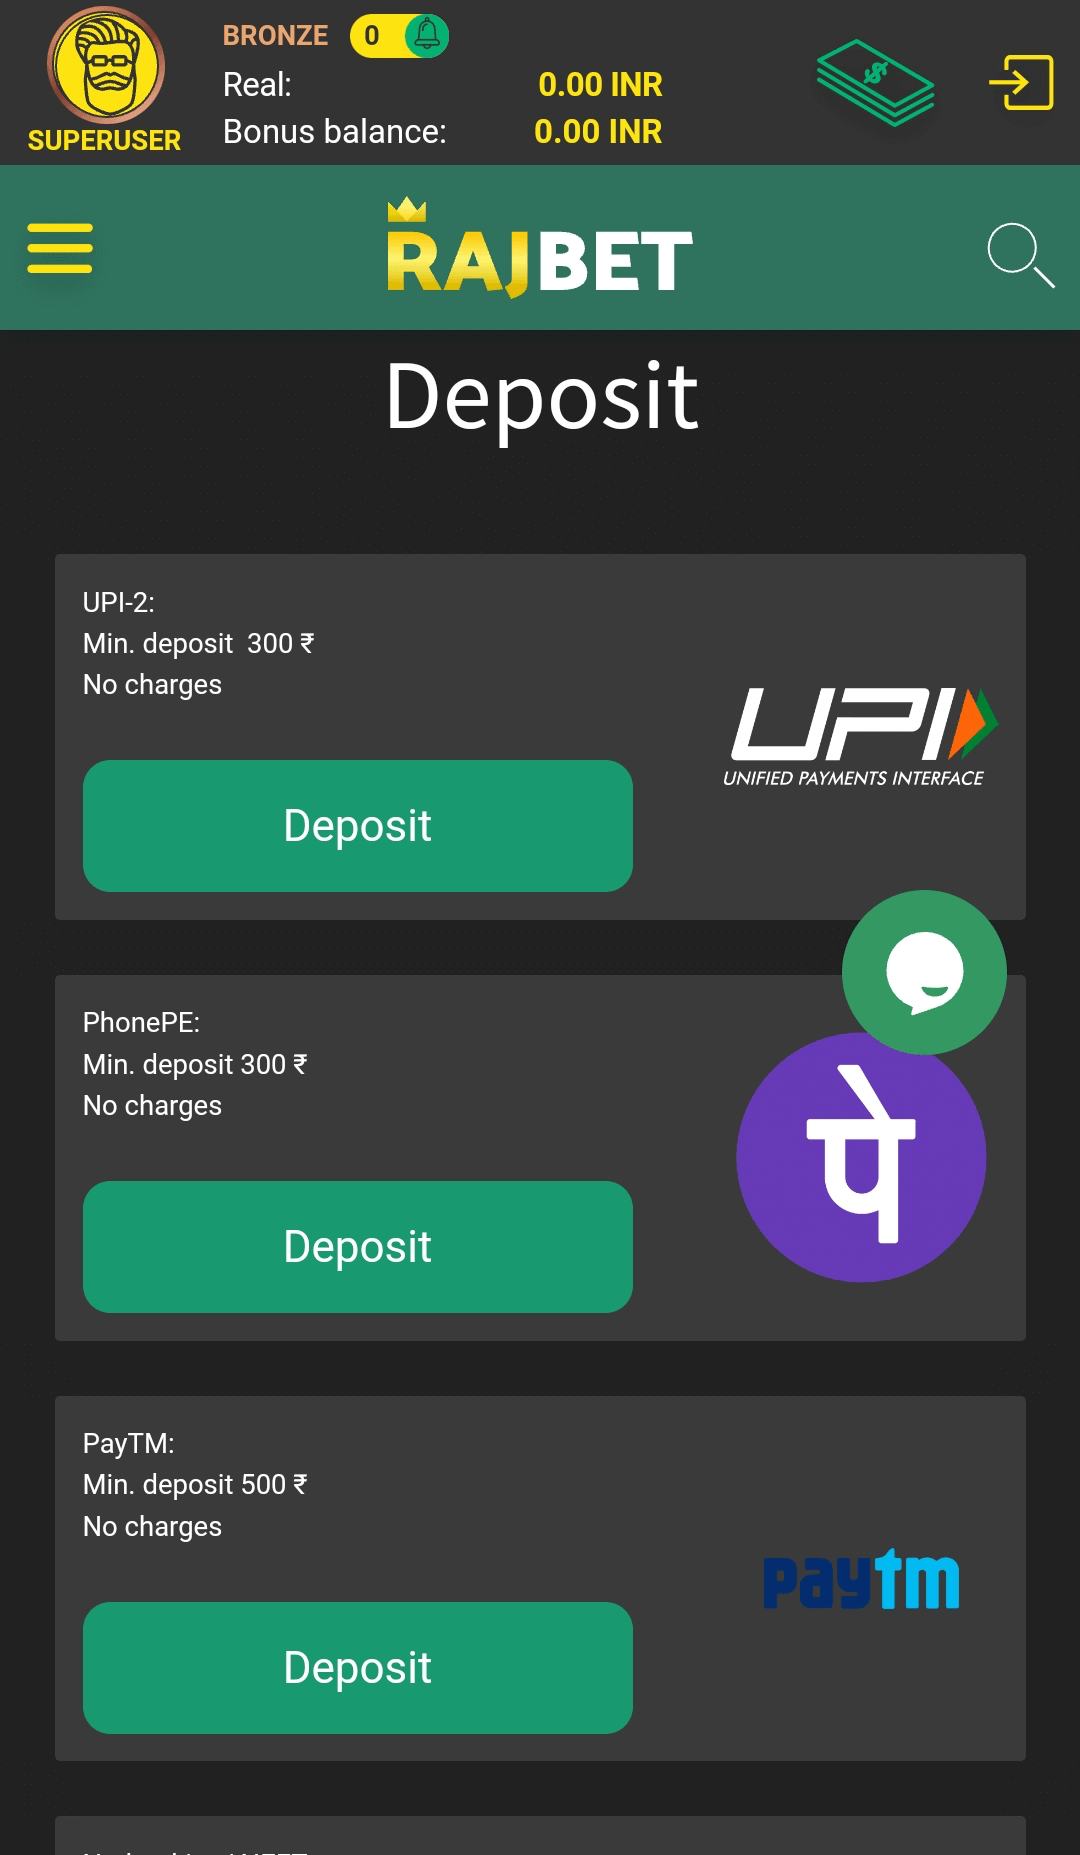 List of available payment methods in the Rajbet app